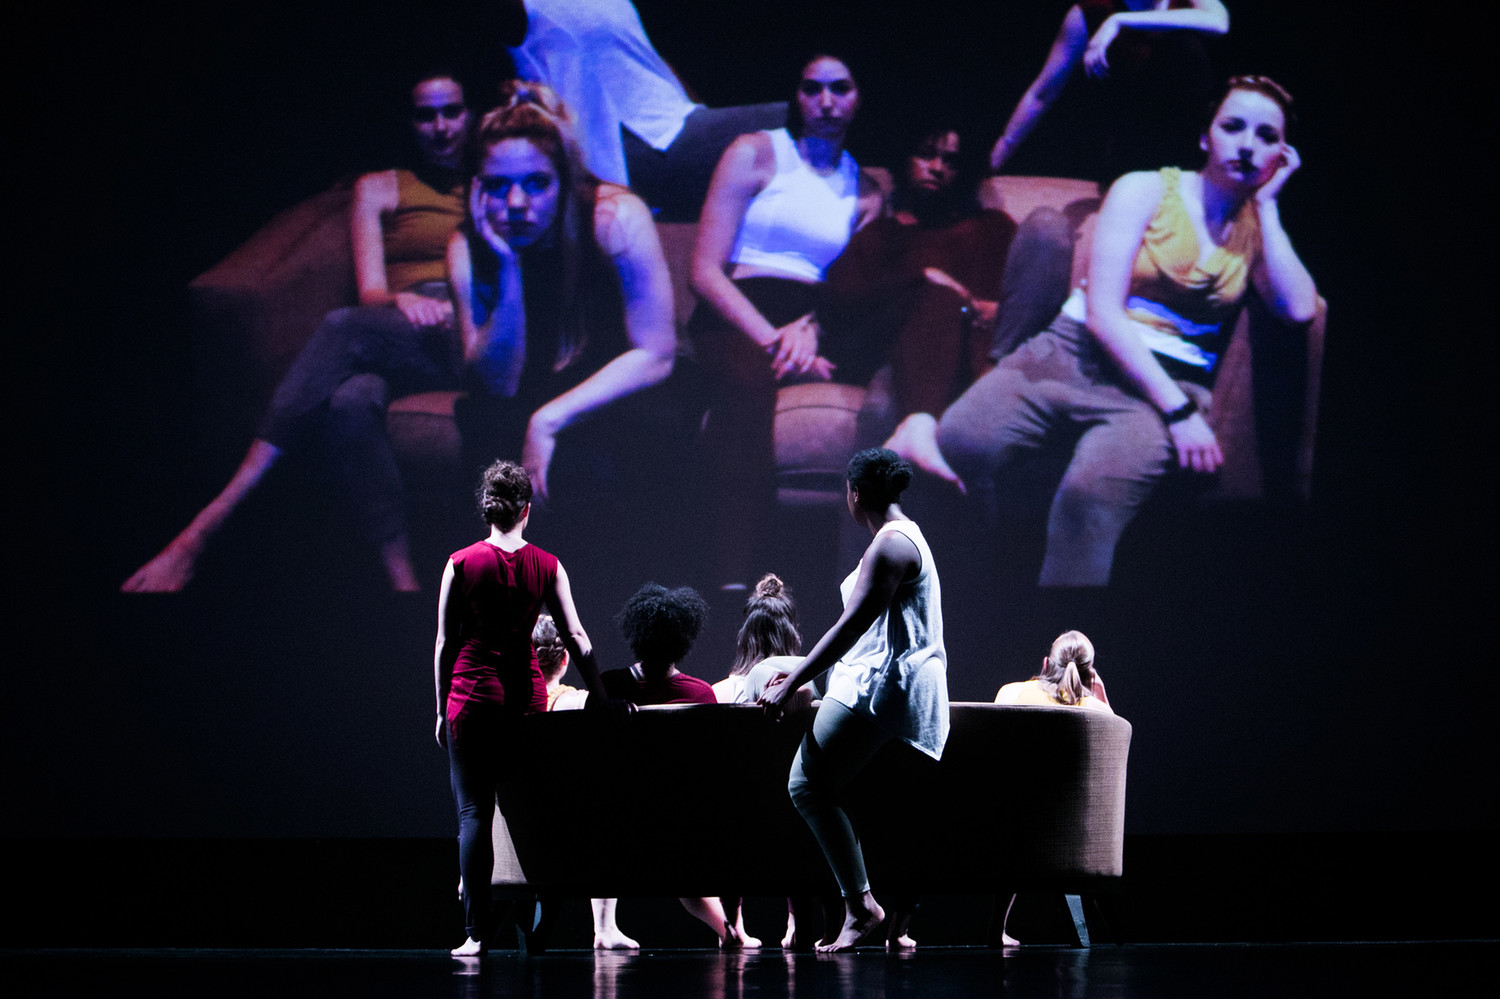 Dancers onstage sitting on couch looking at projection image of themselves